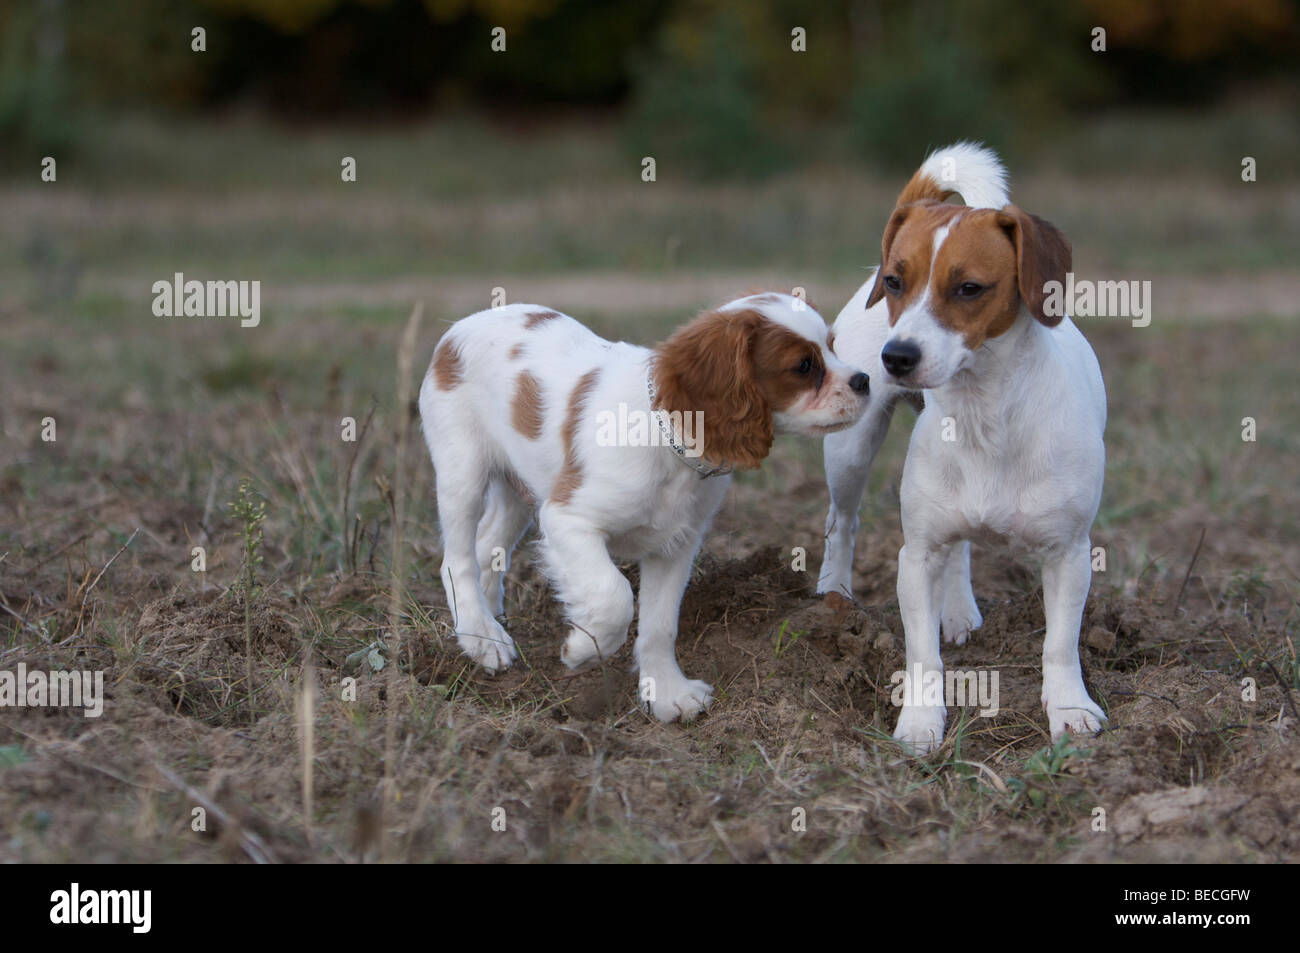 Jack Russel Beagle mixed-breed dog and Cavalier King Charles Spaniel sniffing each other Stock Photo